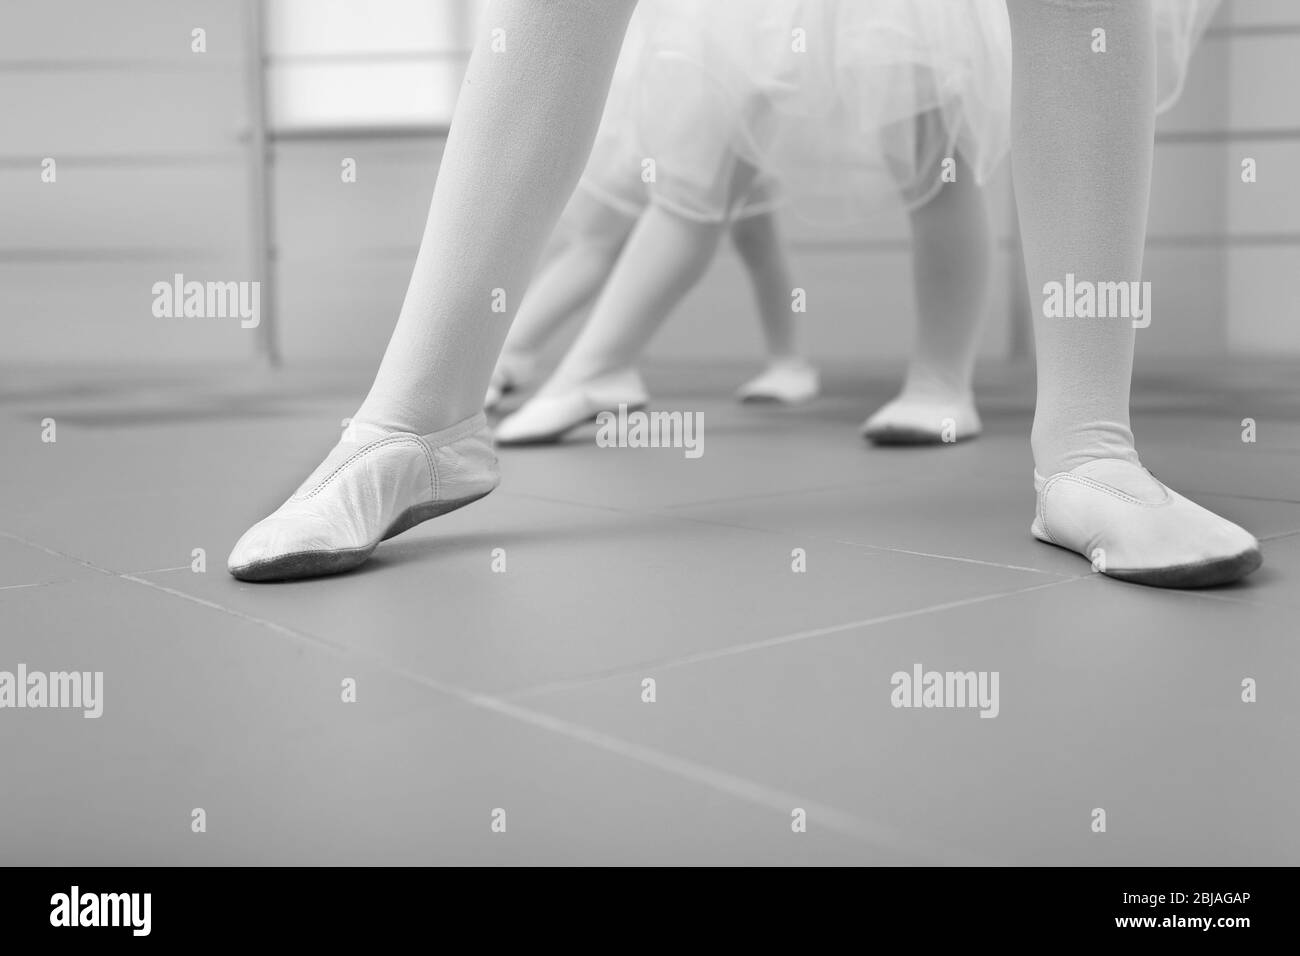 Group ballerinas Black and White Stock Photos & Images - Alamy